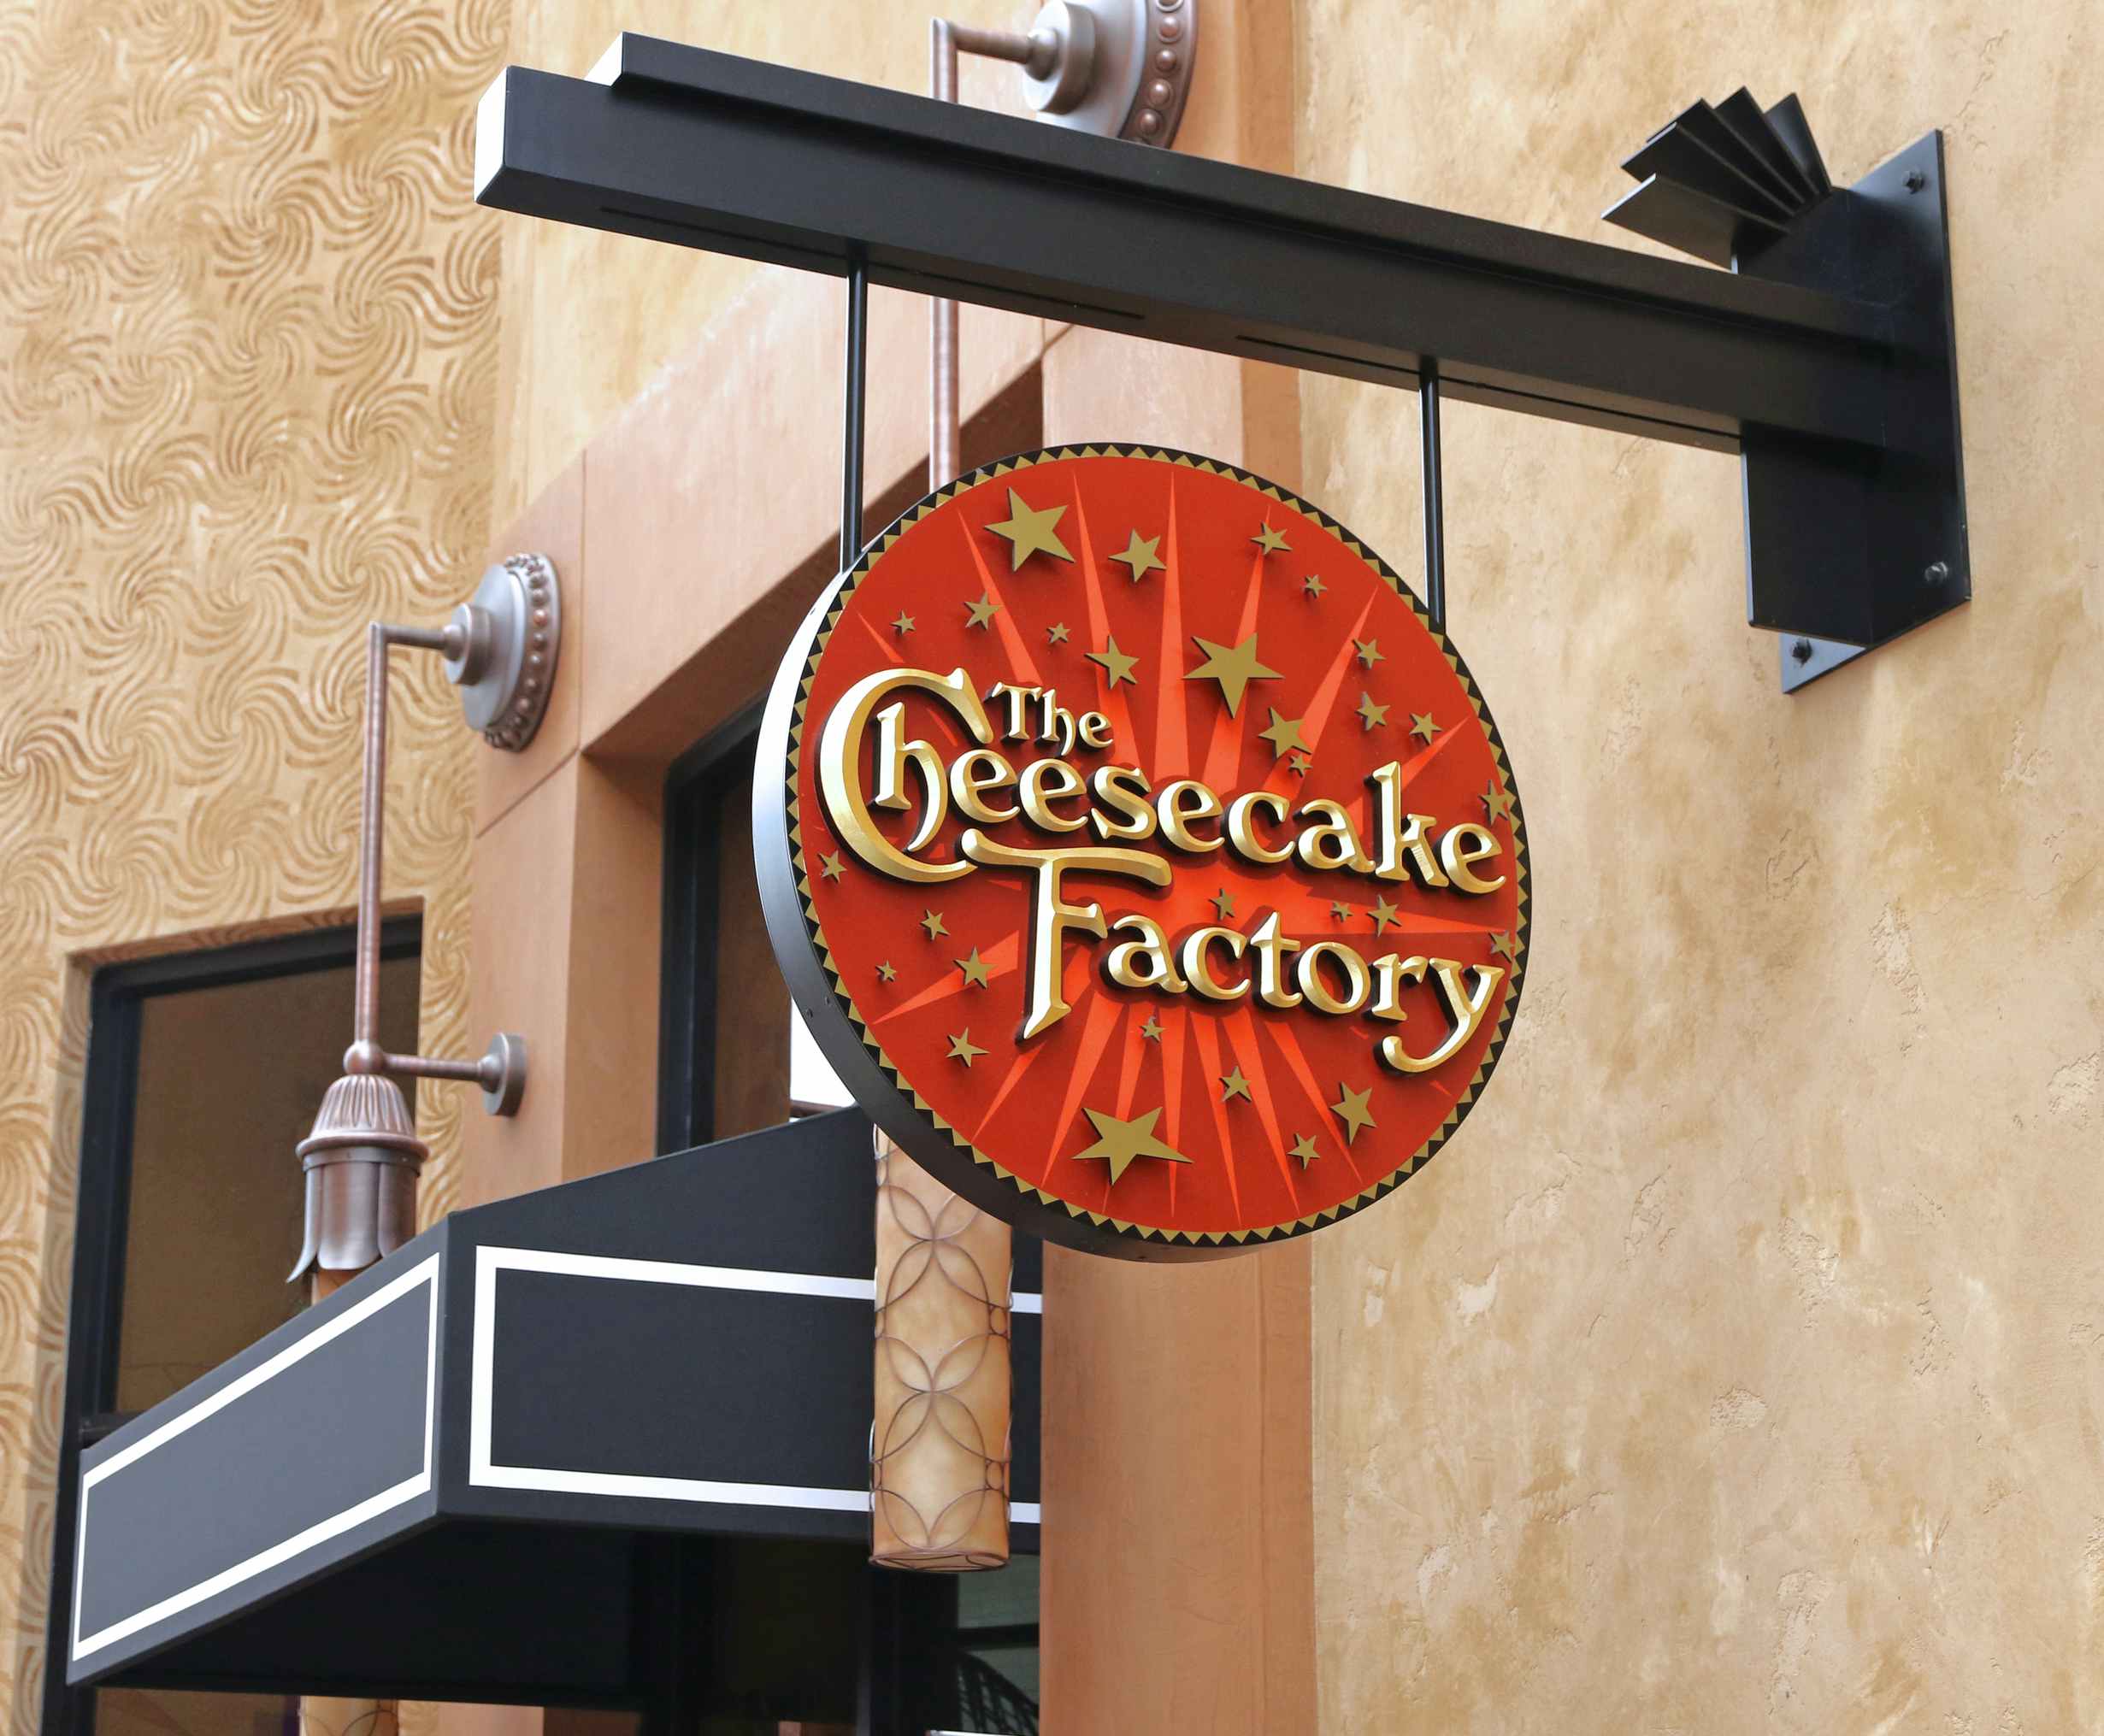 Cheesecake Factory sign from Dreamstime